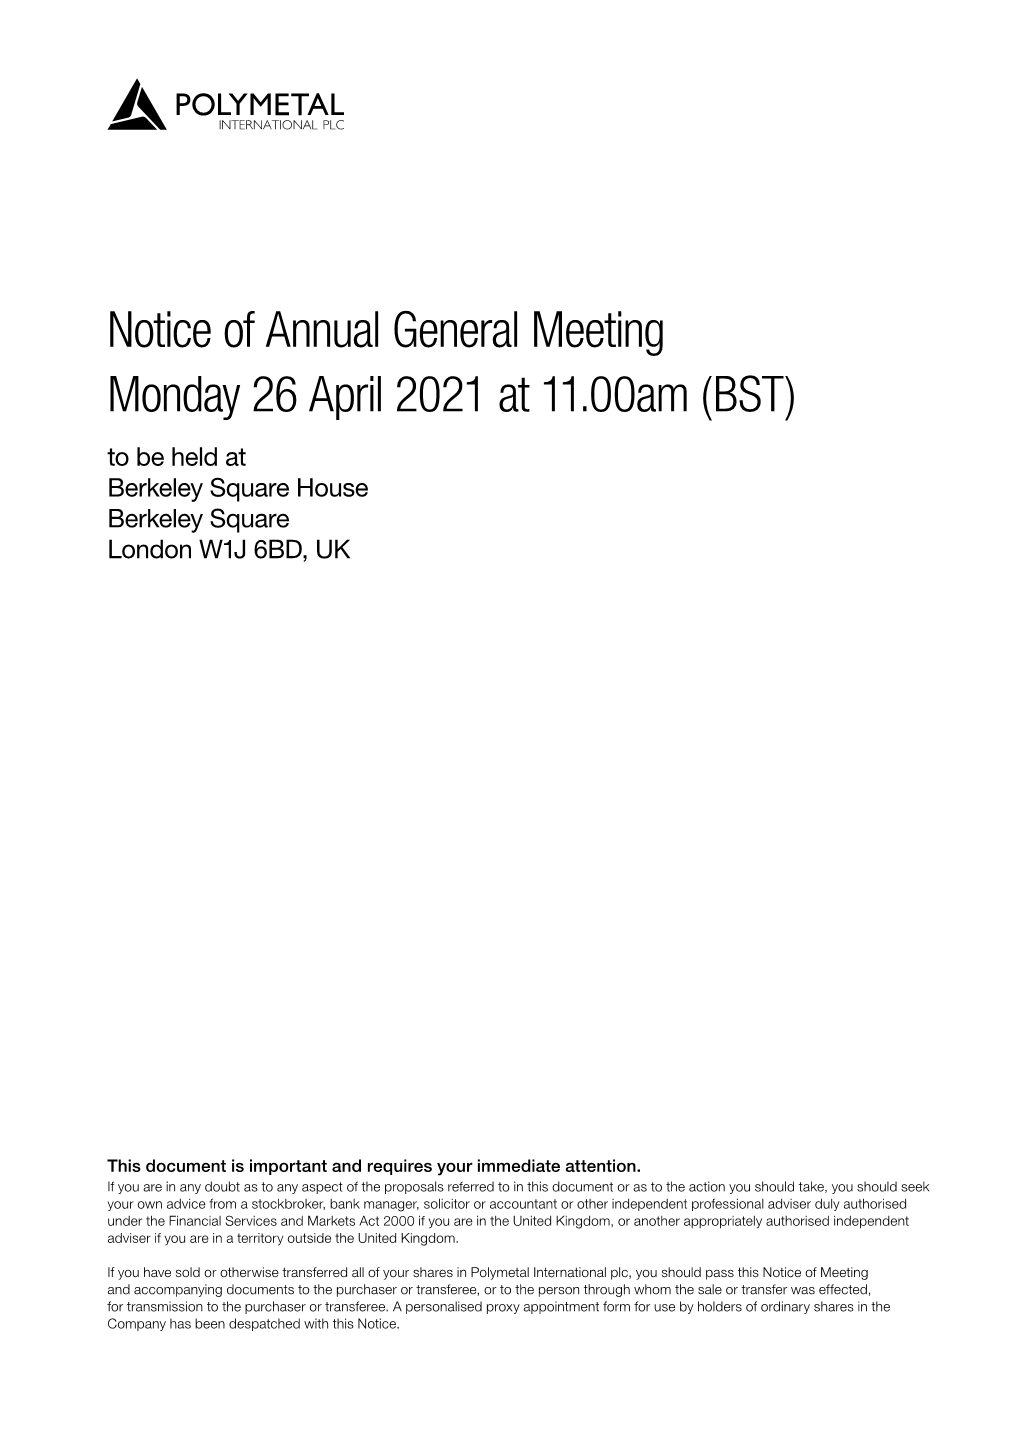 Notice of Annual General Meeting Monday 26 April 2021 at 11.00Am (BST) to Be Held at Berkeley Square House Berkeley Square London W1J 6BD, UK